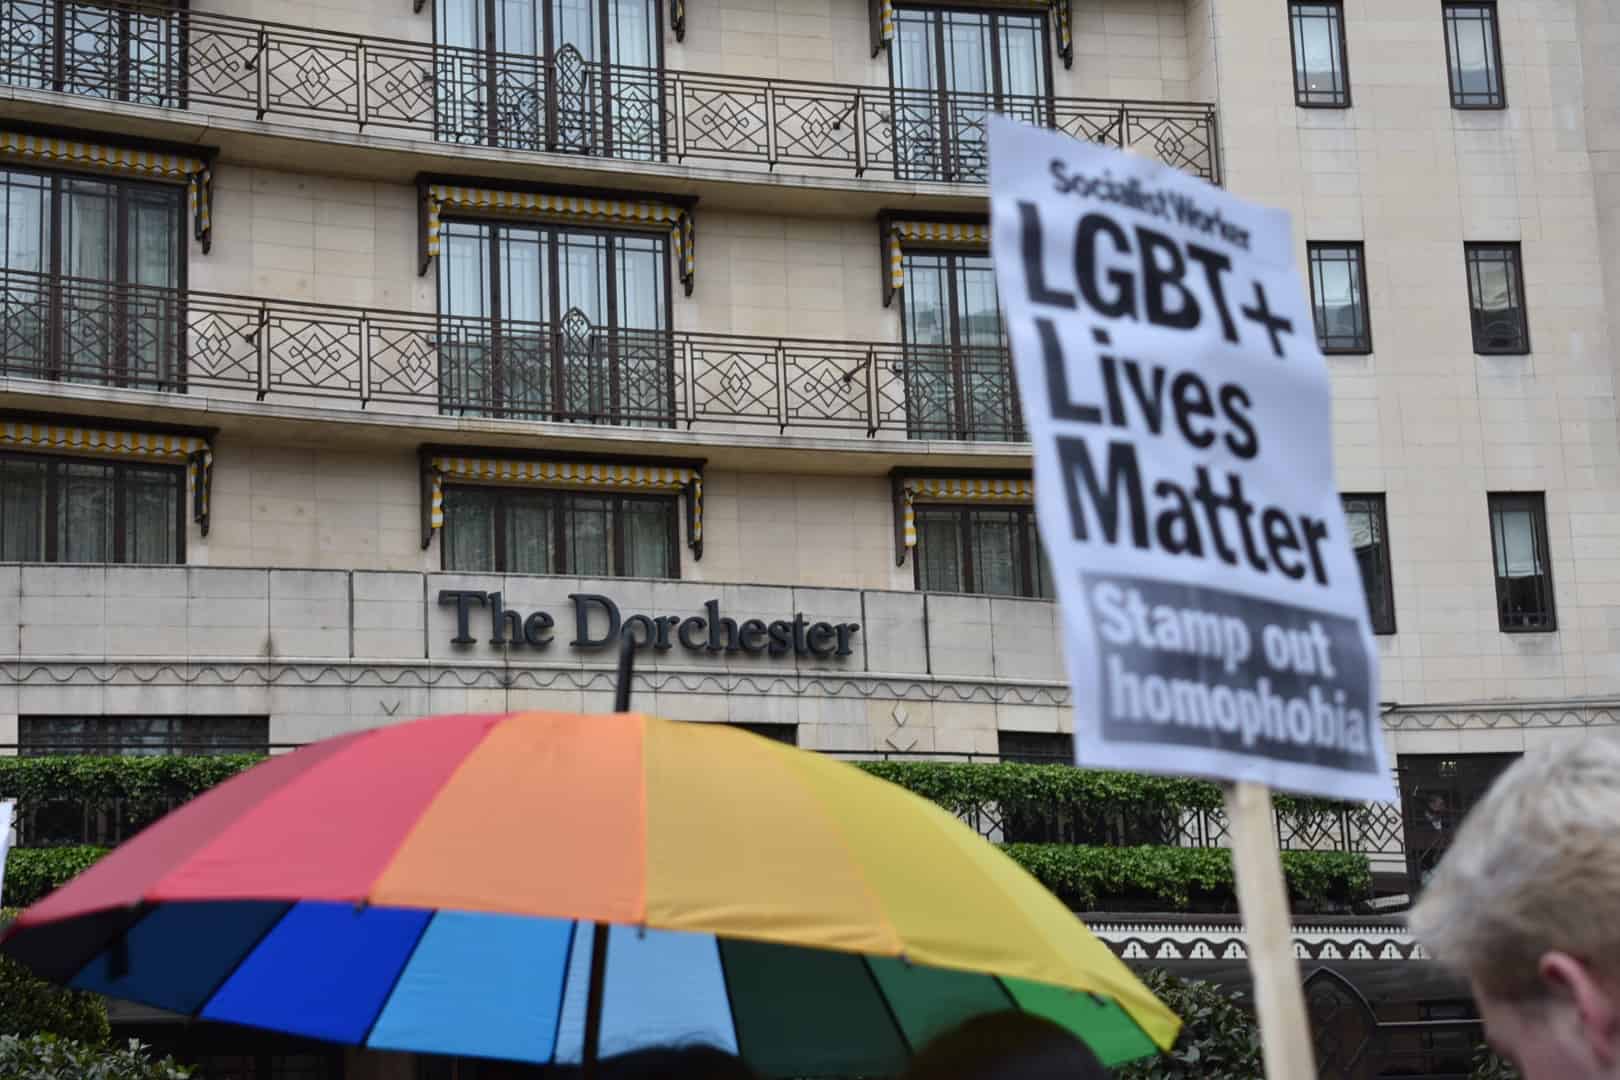 How will LGBTQ+ rights change under a Tory government in post-Brexit Britain?